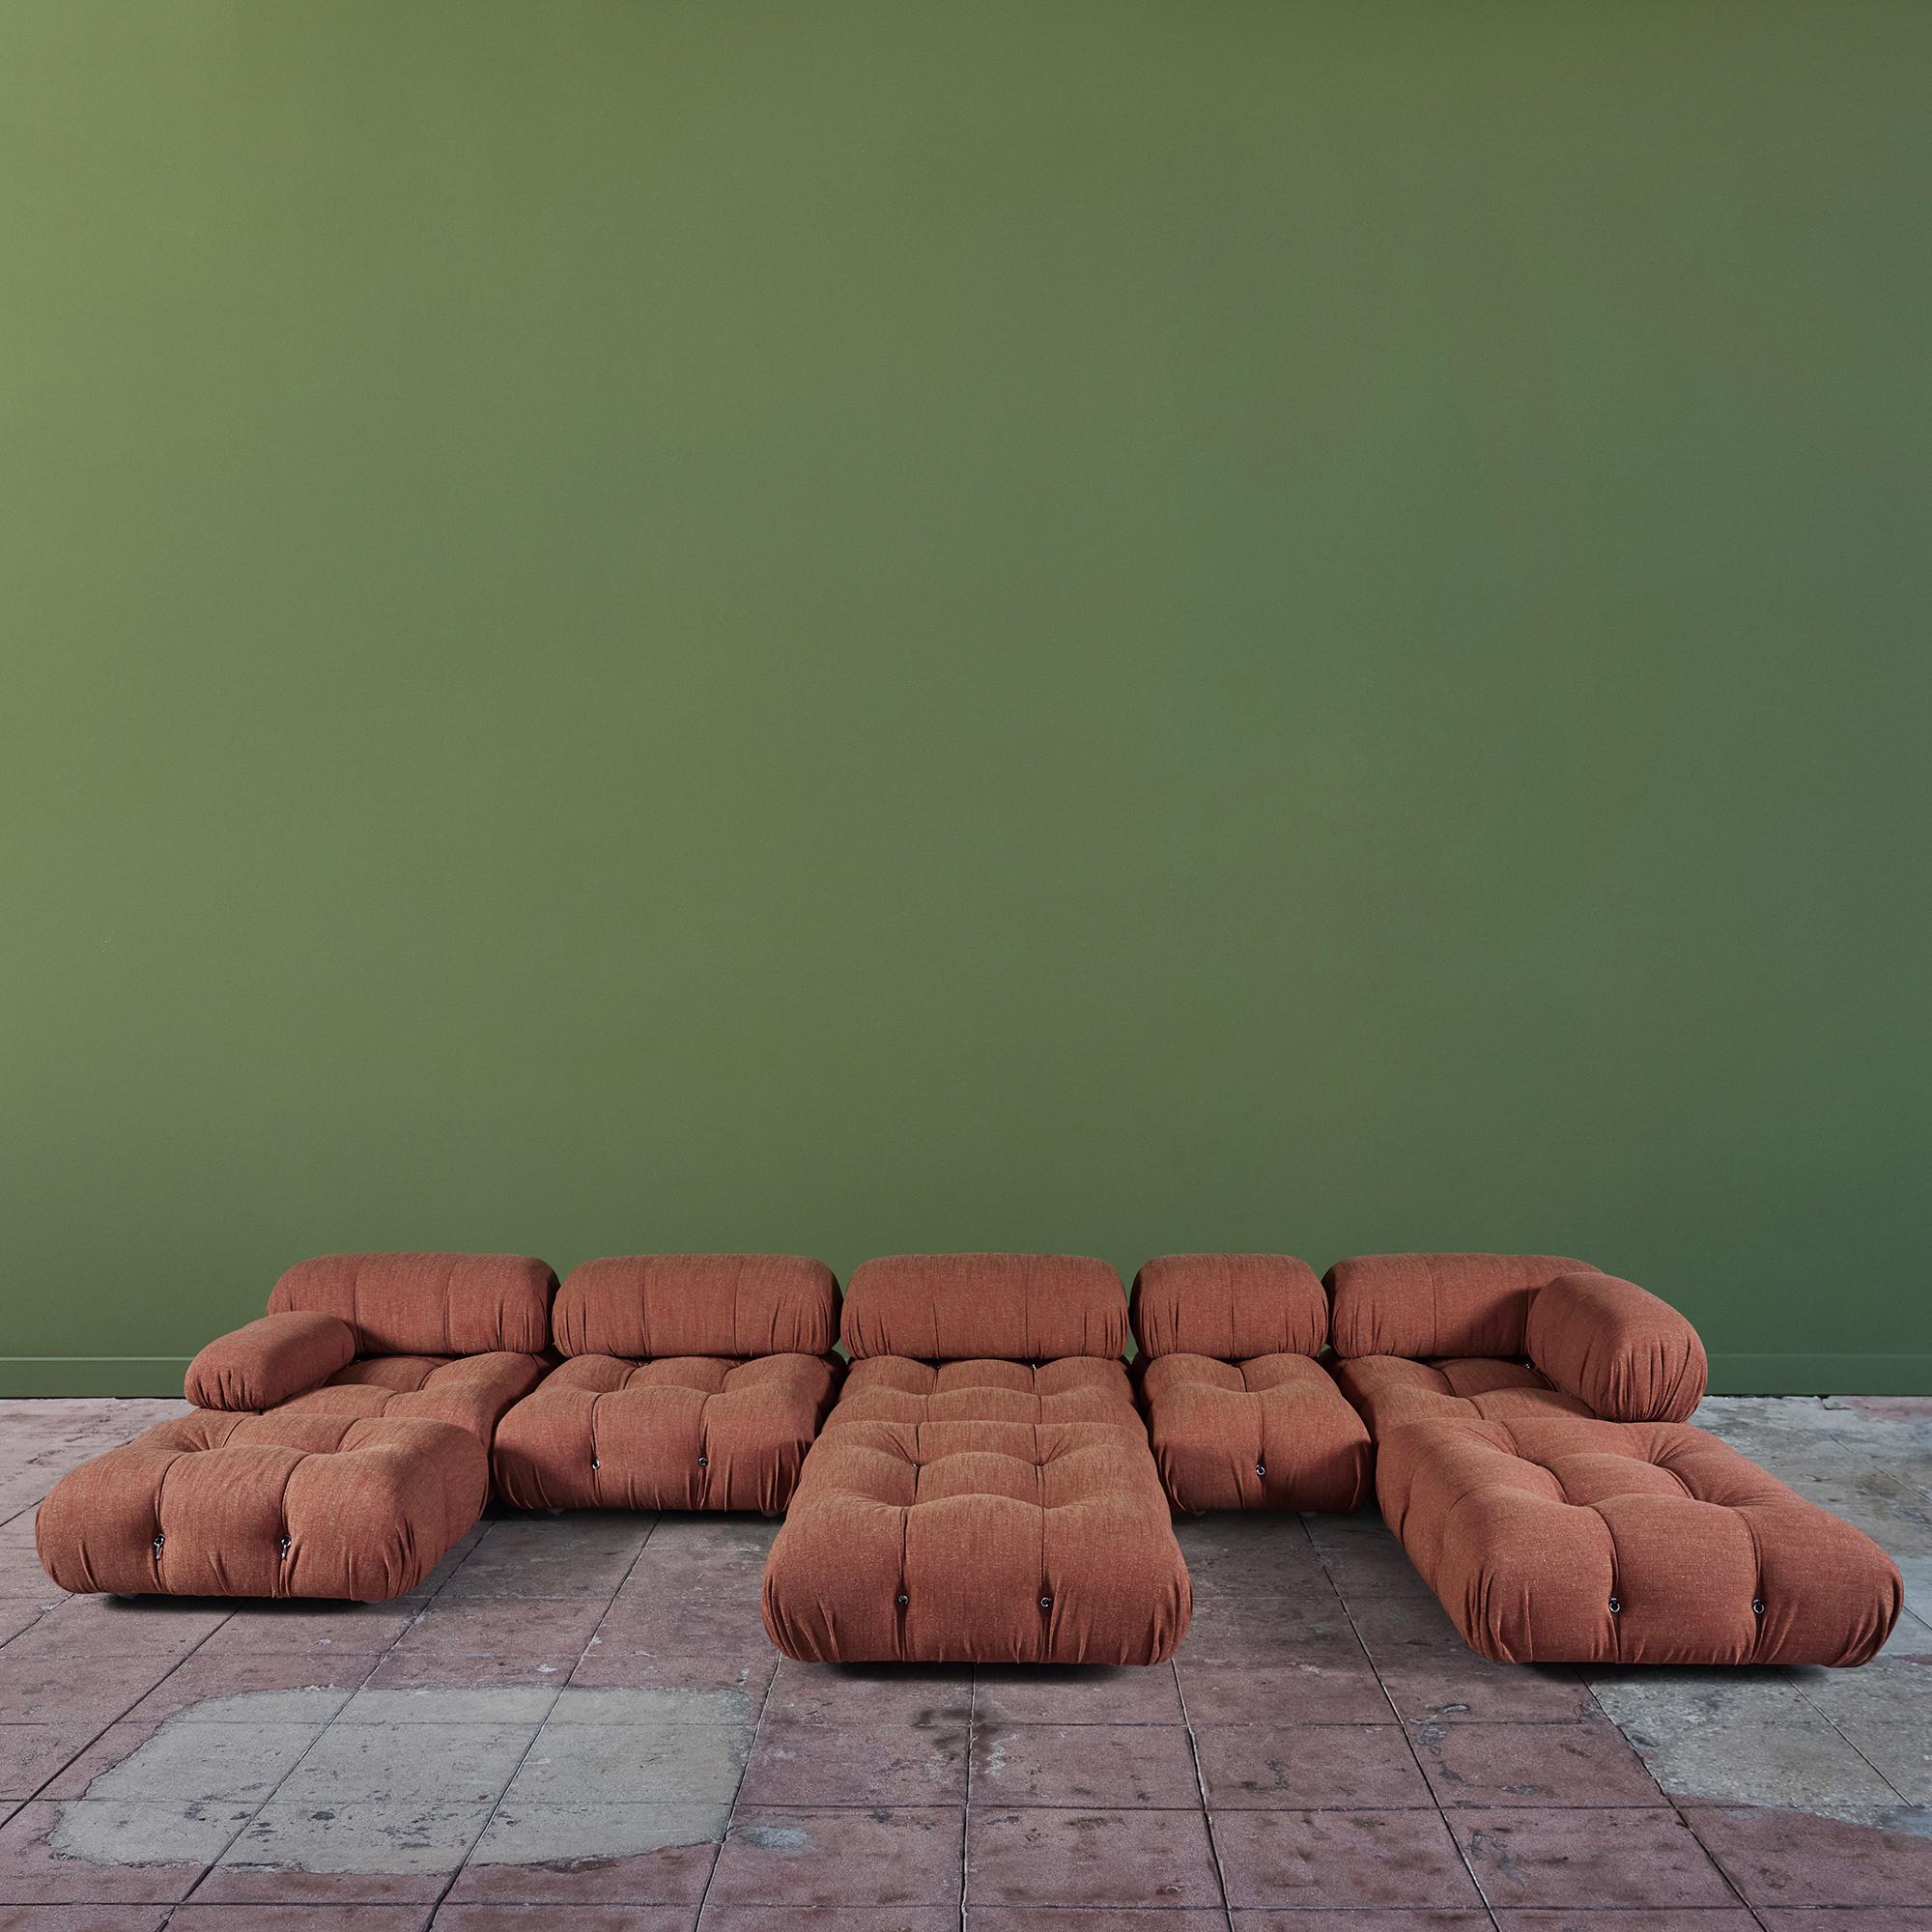 Camaleonda Modular Sofa by Mario Bellini for B&B Italia, Italy, c.2000's. This sofa features all modular seating elements to be arranged in a variety of seating arrangements. The seat backs and armrests are removable and can interchange between